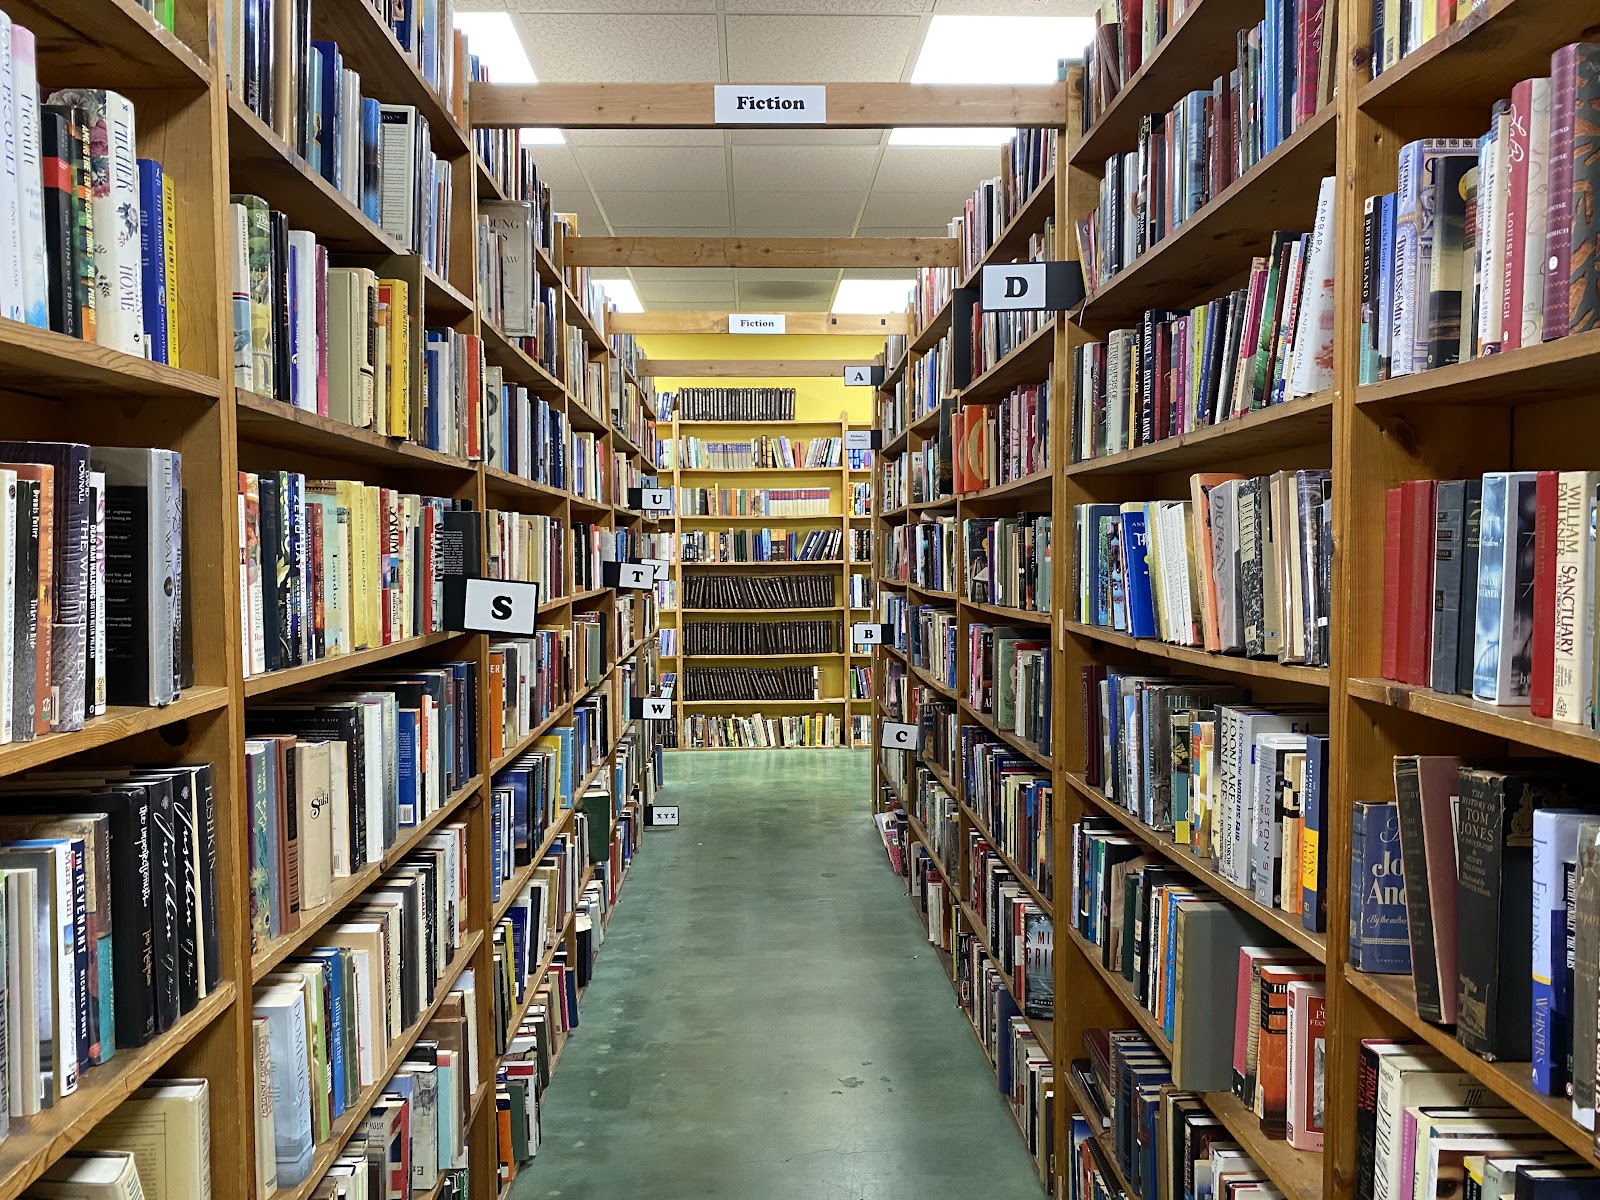 Many books can be found at the Bookman in Orange, CA.